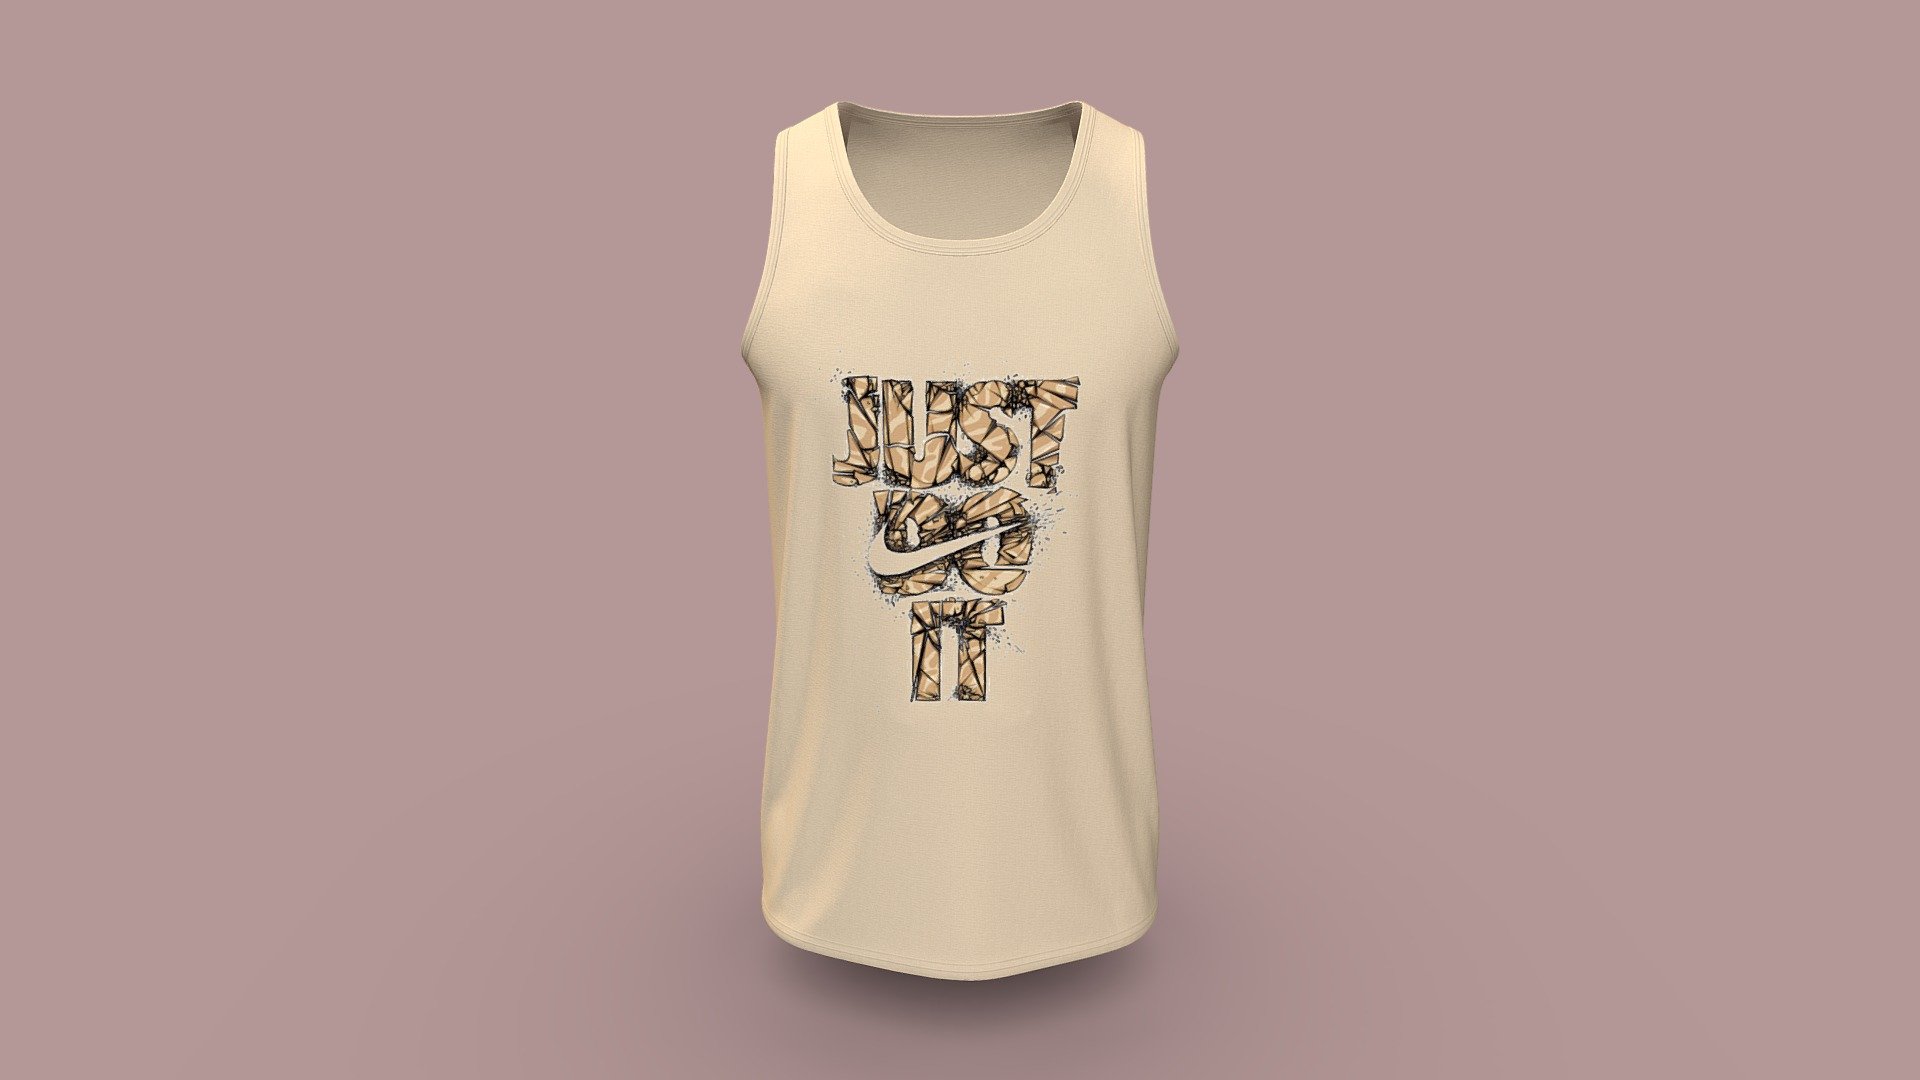 Cloth Title = Tank top 3D Clothing Design 

SKU = DG100211 

Category = Unisex 

Product Type = Tank Top 

Cloth Length = Regular 

Body Fit = Fitted  

Occasion = Sportswear  


Our Services:

3D Apparel Design.

OBJ,FBX,GLTF Making with High/Low Poly.

Fabric Digitalization.

Mockup making.

3D Teck Pack.

Pattern Making.

2D Illustration.

Cloth Animation and 360 Spin Video.


Contact us:- 

Email: info@digitalfashionwear.com 

Website: https://digitalfashionwear.com 


We designed all the types of cloth specially focused on product visualization, e-commerce, fitting, and production. 

We will design: 

T-shirts 

Polo shirts 

Hoodies 

Sweatshirt 

Jackets 

Shirts 

TankTops 

Trousers 

Bras 

Underwear 

Blazer 

Aprons 

Leggings 

and All Fashion items. 





Our goal is to make sure what we provide you, meets your demand 3d model